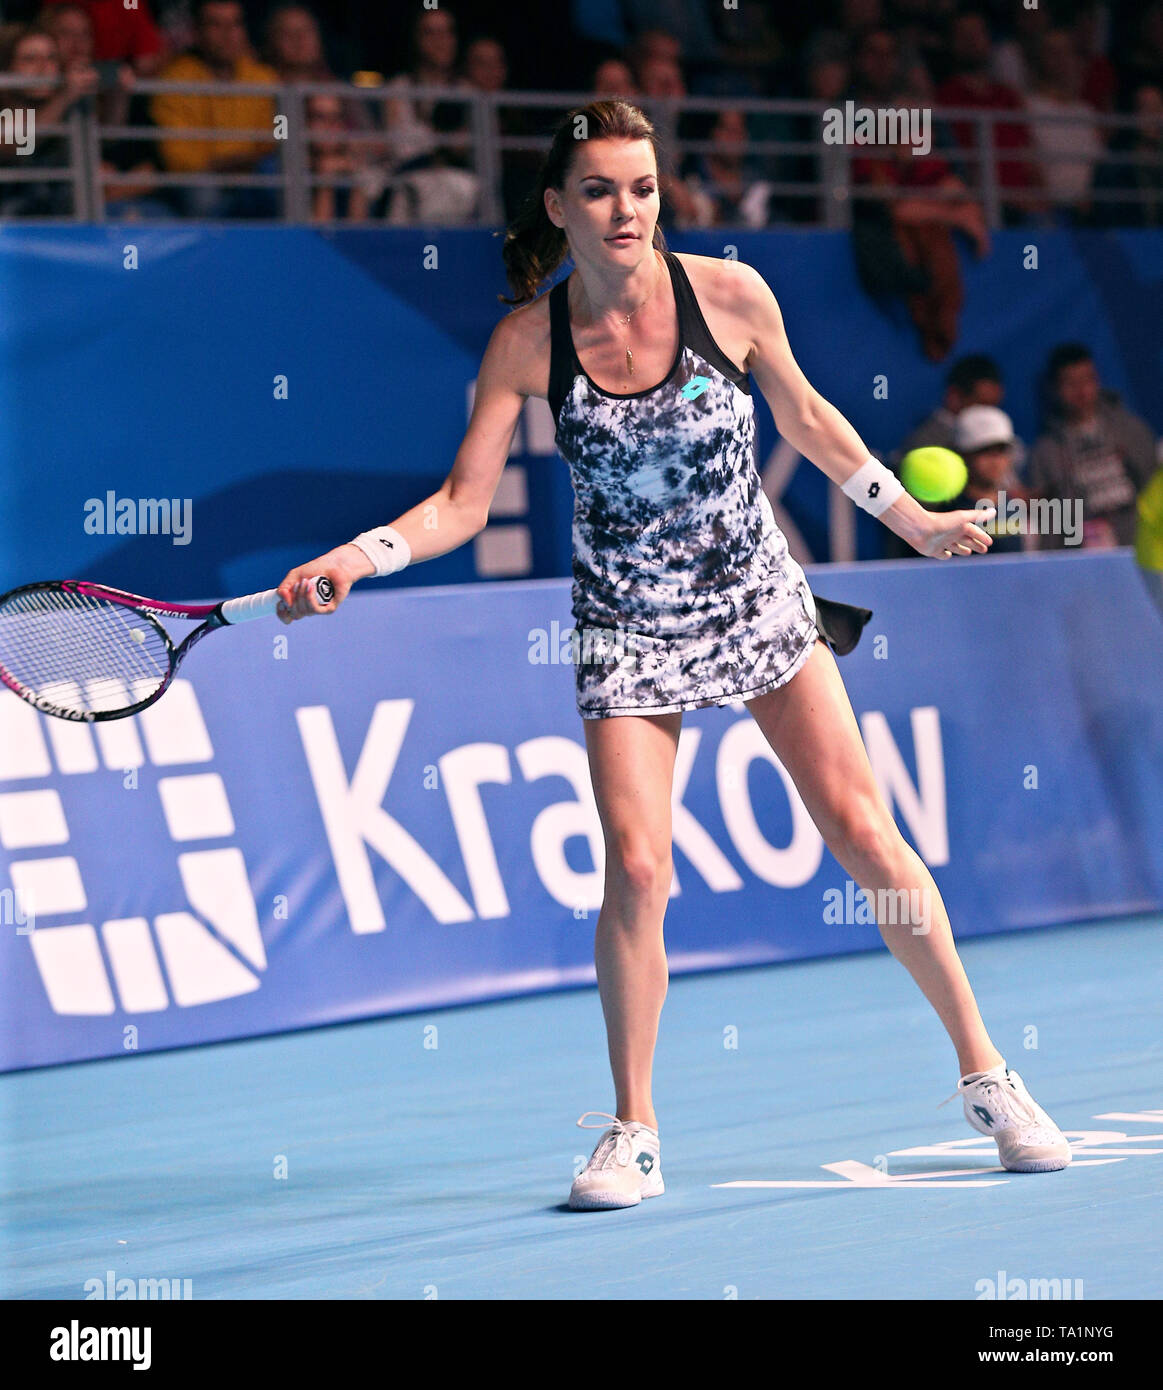 Agnieszka Radwanska seen during a tennis match in honor of her sport career. An event was held in honor of Polish tennis player Agnieszka Radwanska, who ended her sports career as she was the best Polish tennis player in history. Agnieszka Radwanska plays against Caroline Wozniacki. Stock Photo